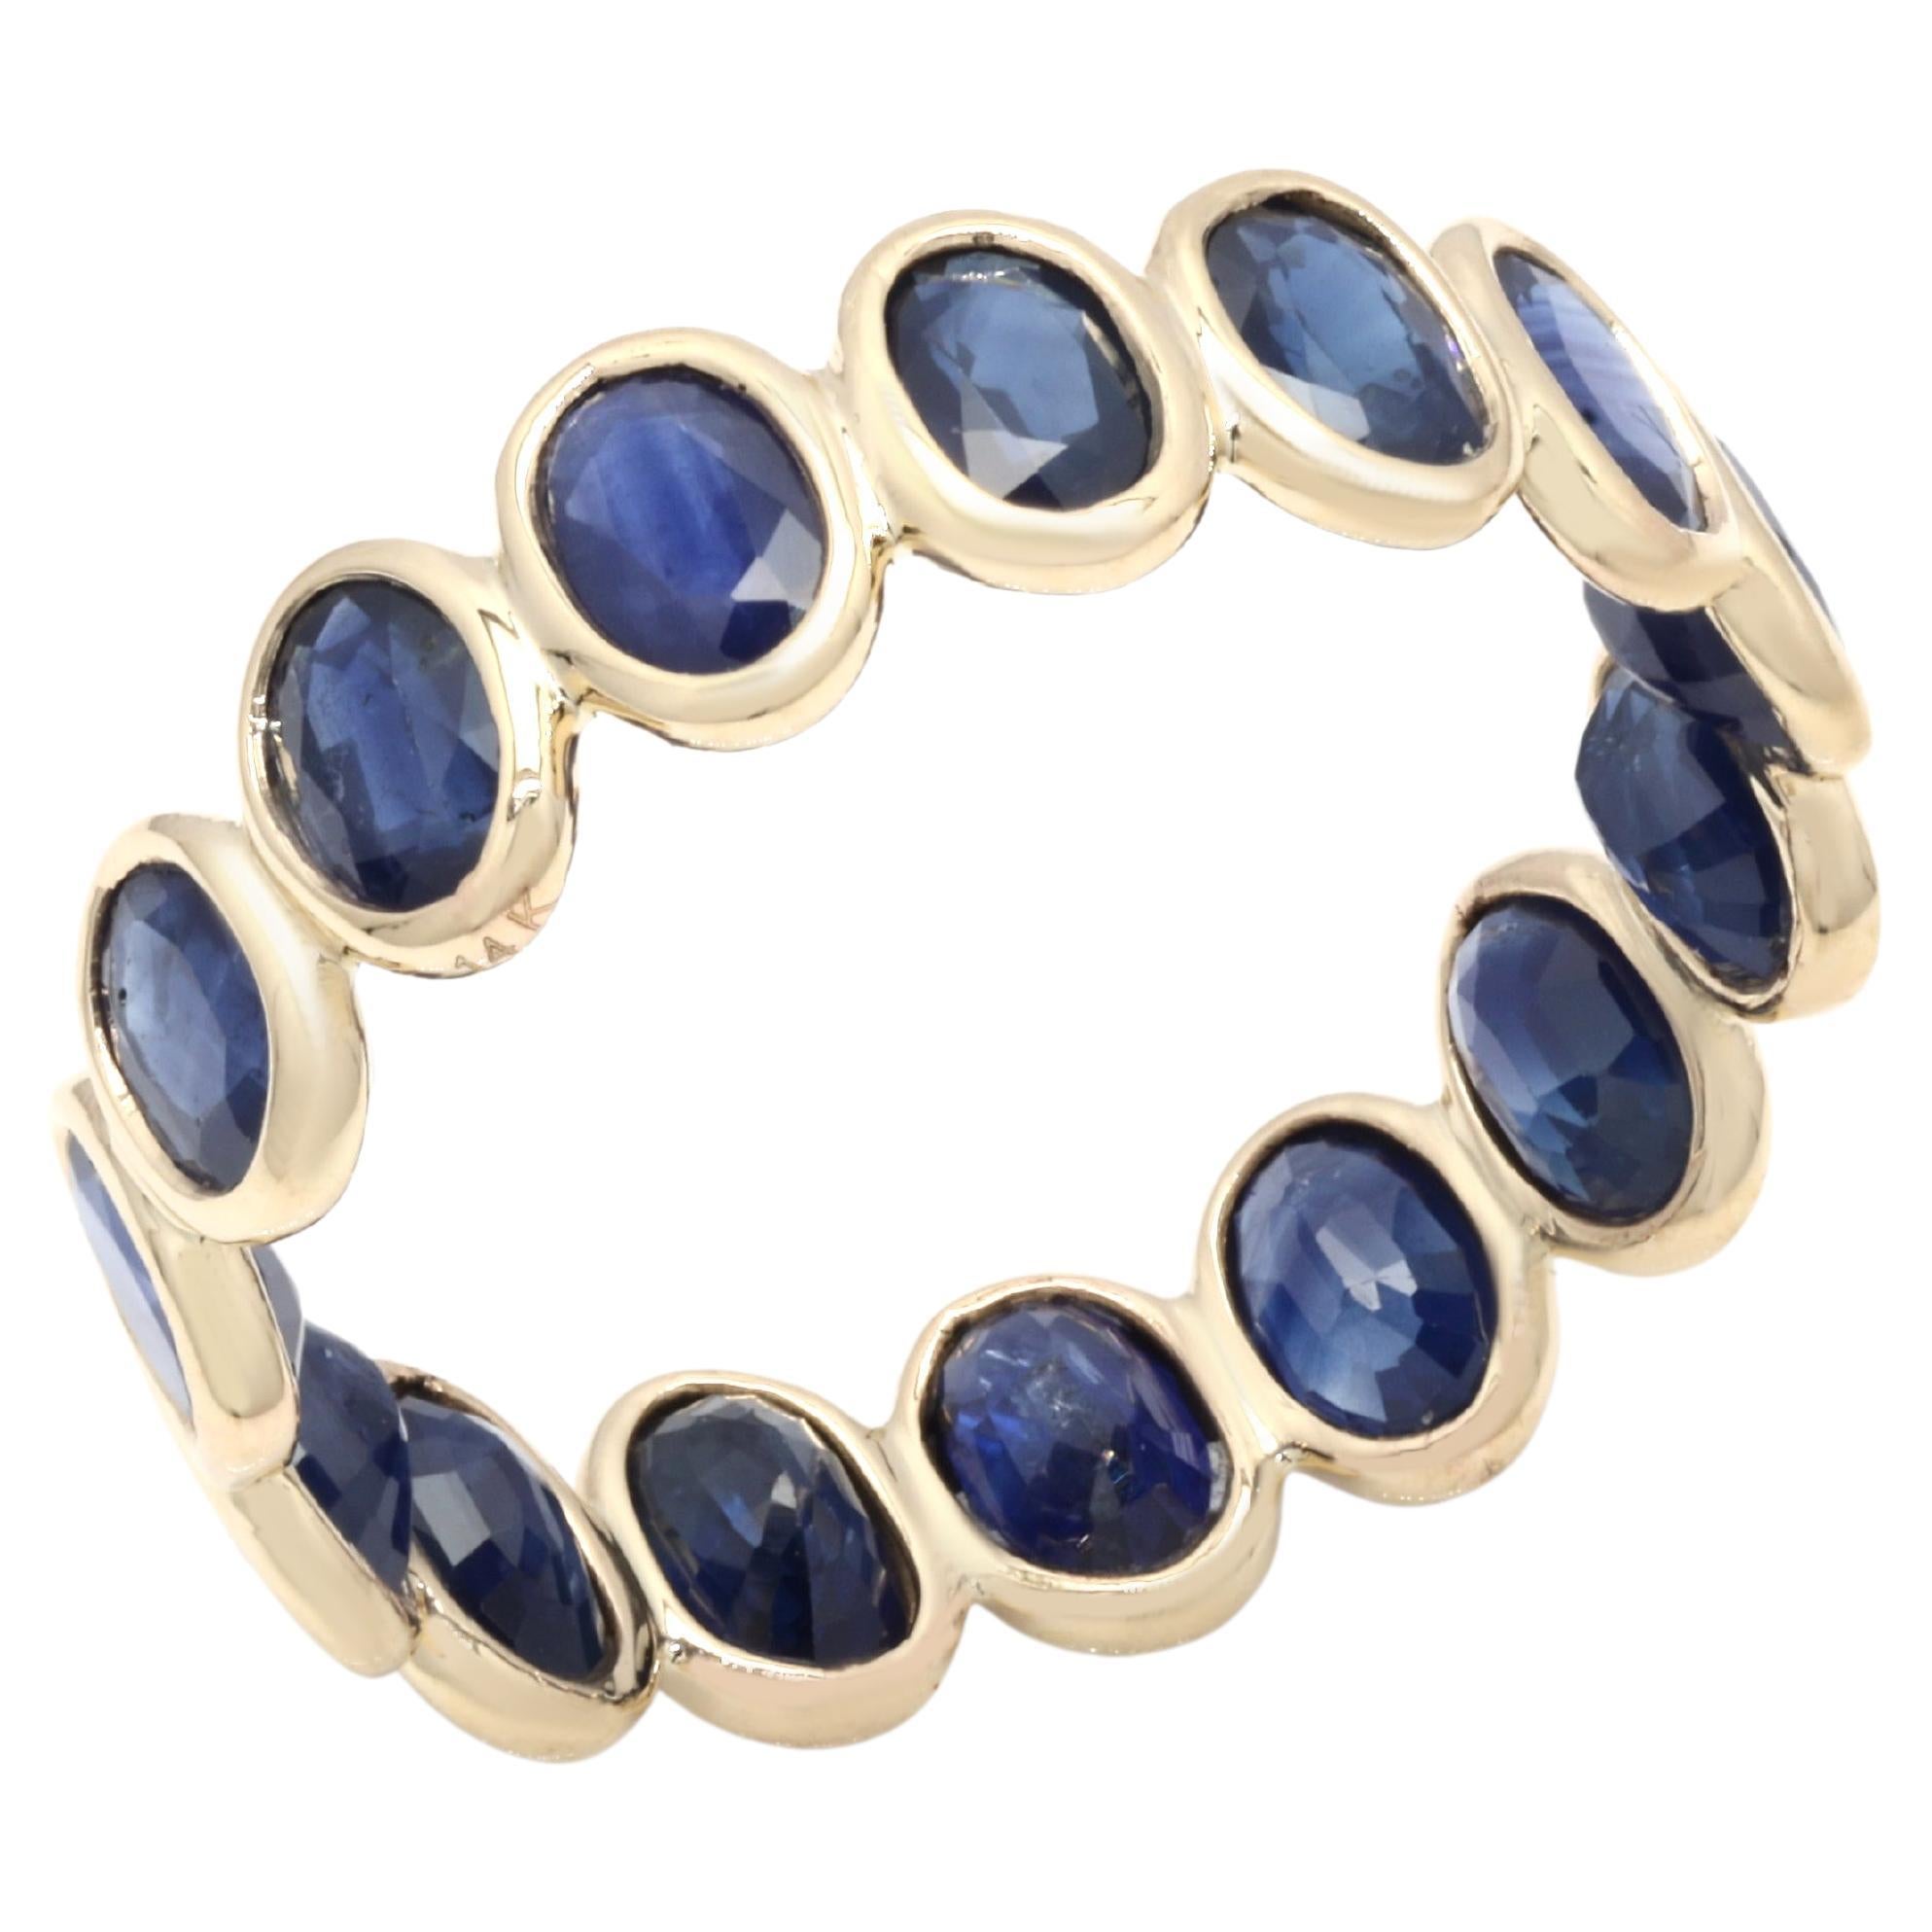 For Sale:  14K Yellow Gold 5 Carat Oval Cut Sapphire Eternity Band Ring